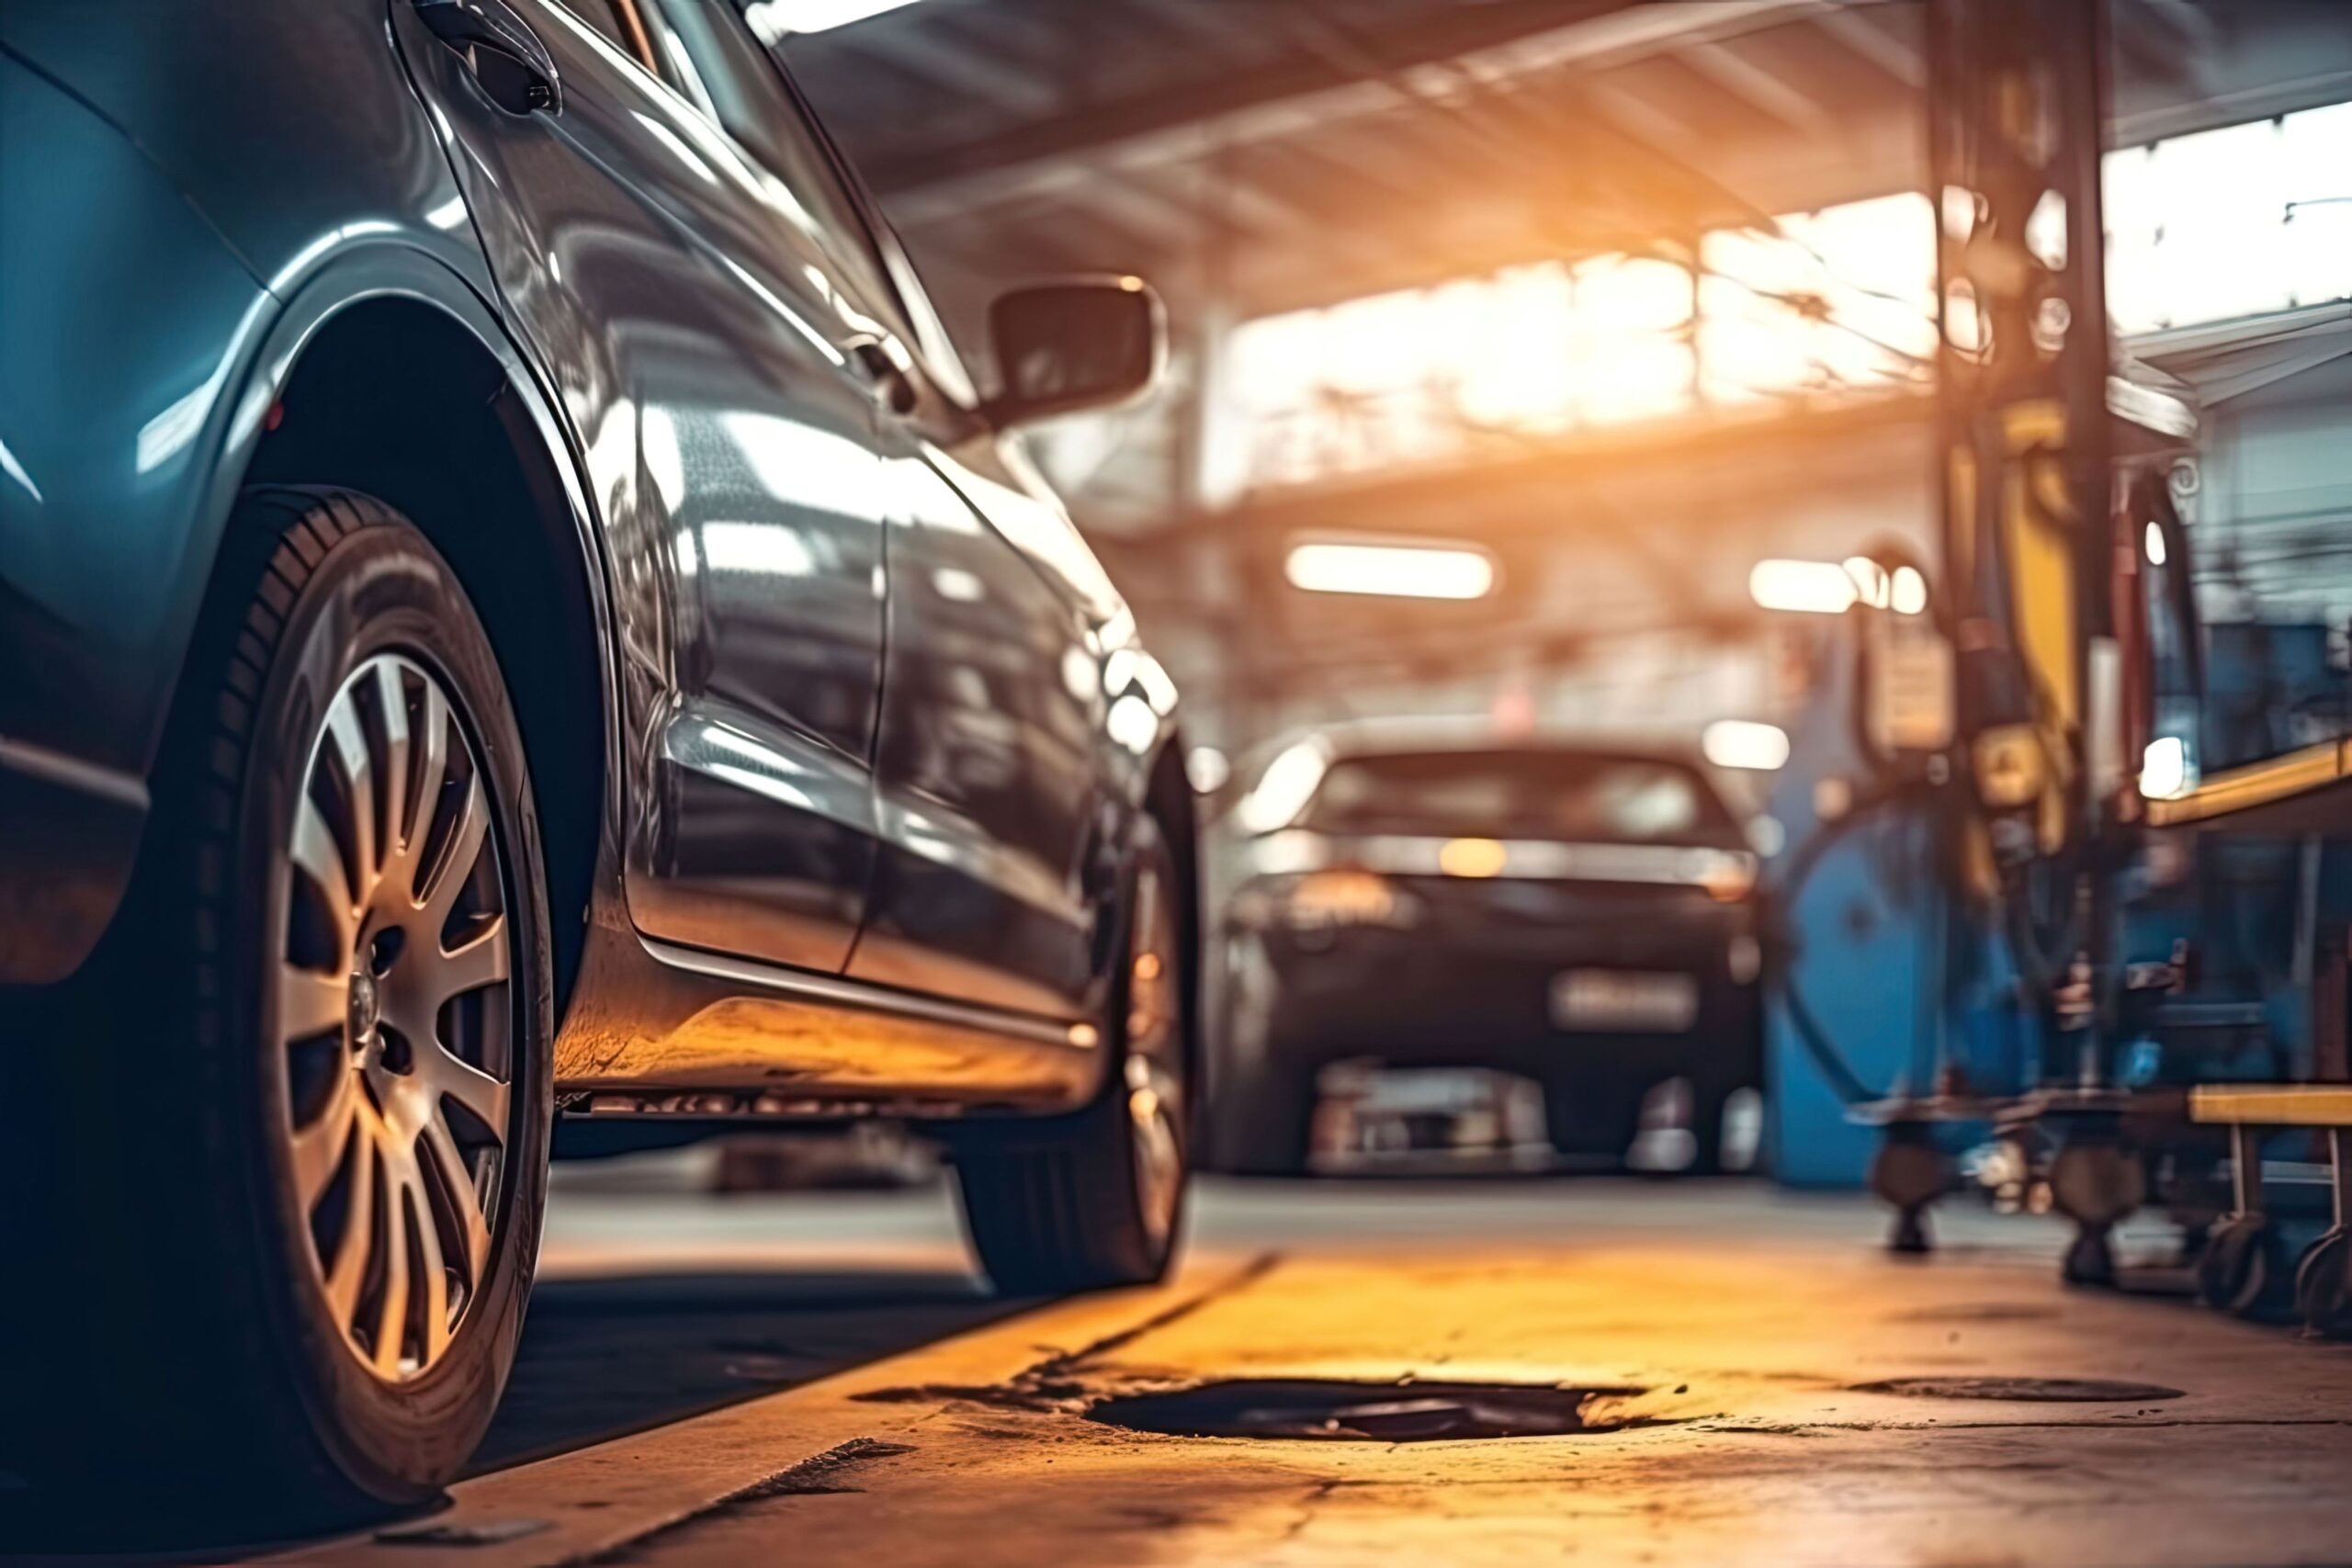 No matter what year or model vehicle you own, you can expect nothing less than the best results from our professional team. From a small ding or dent repair, touching up a chip or scratch, you can expect great service and quality workmanship.